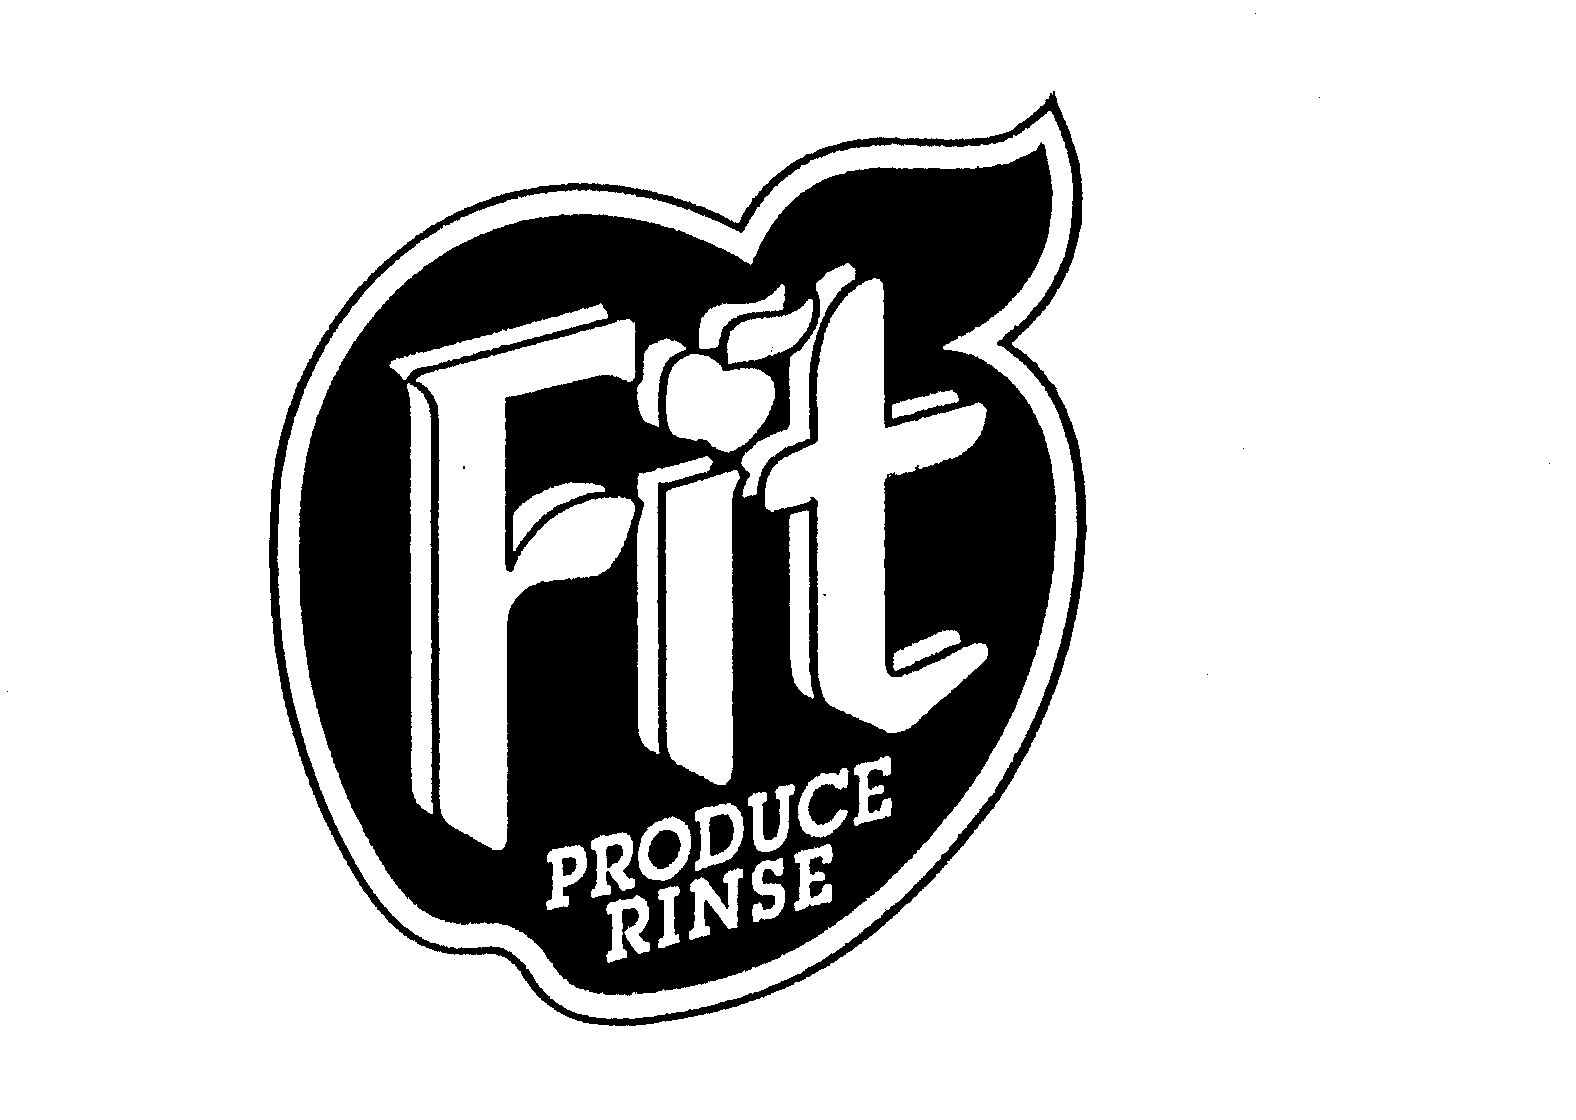  FIT PRODUCE RINSE